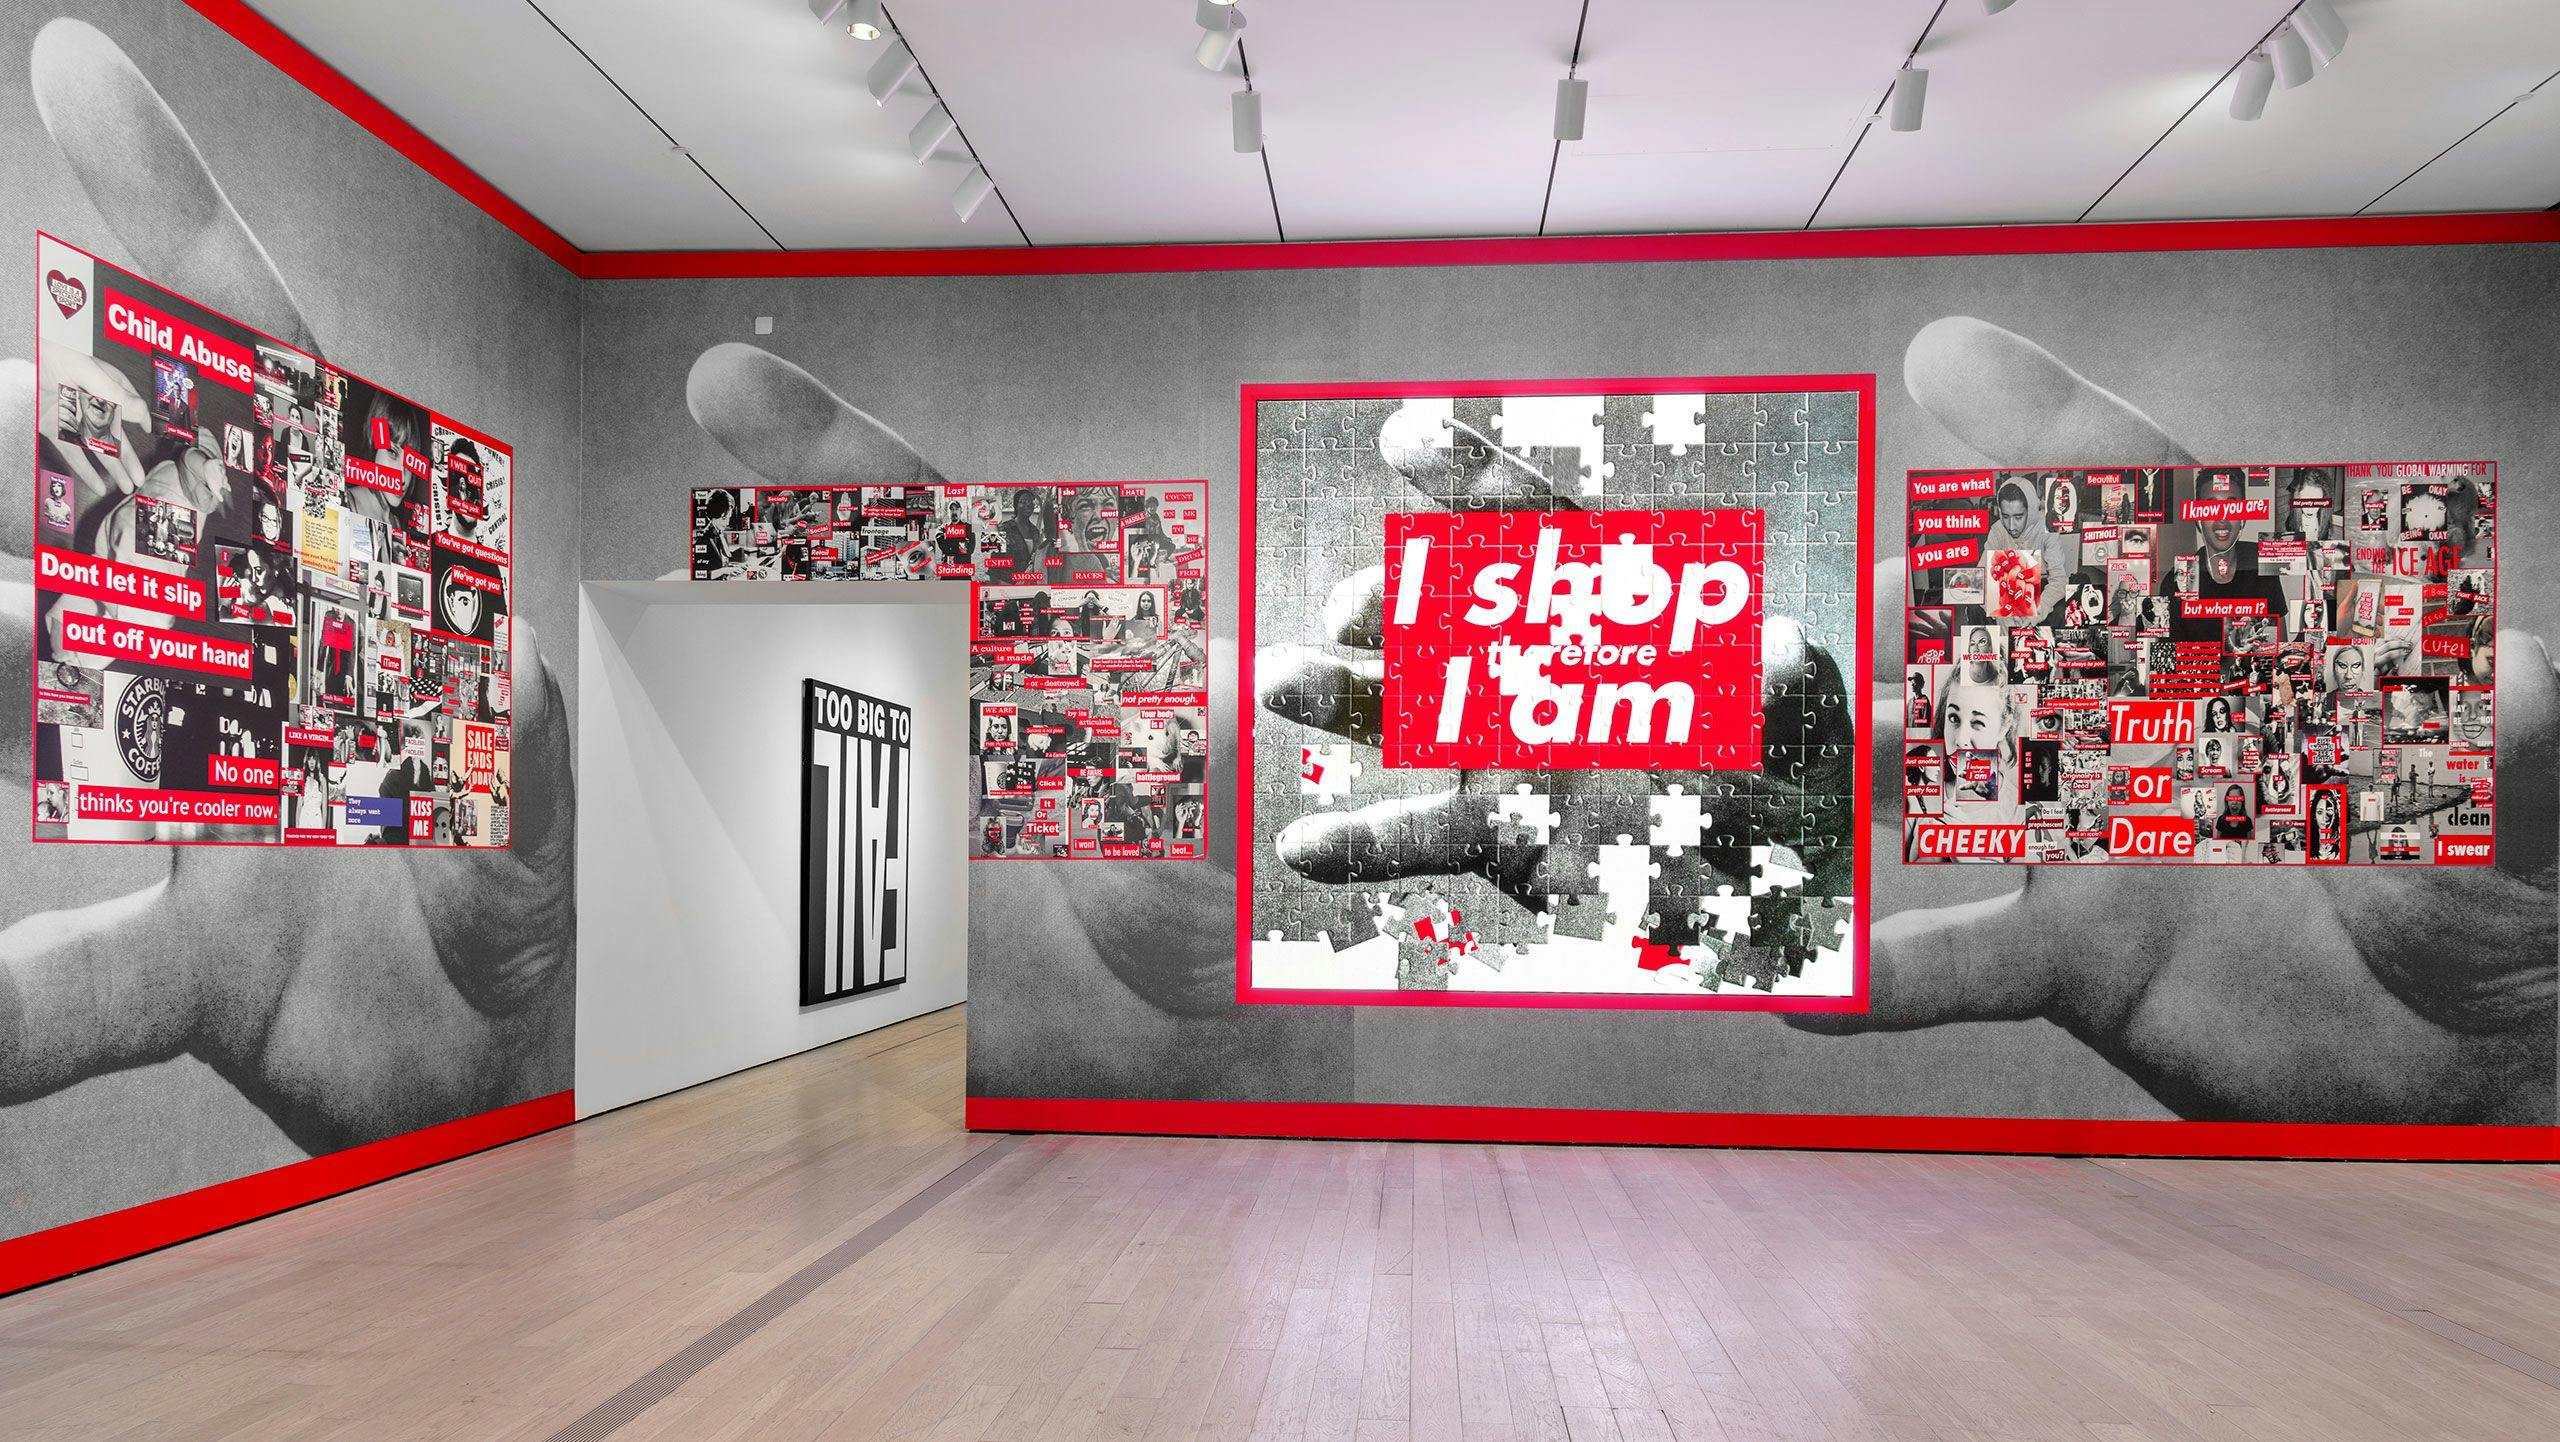 Installation view of the exhibition, Barbara Kruger: Thinking of You. I Mean Me. I Mean You., at Los Angeles County Museum of Art, dated 2022.